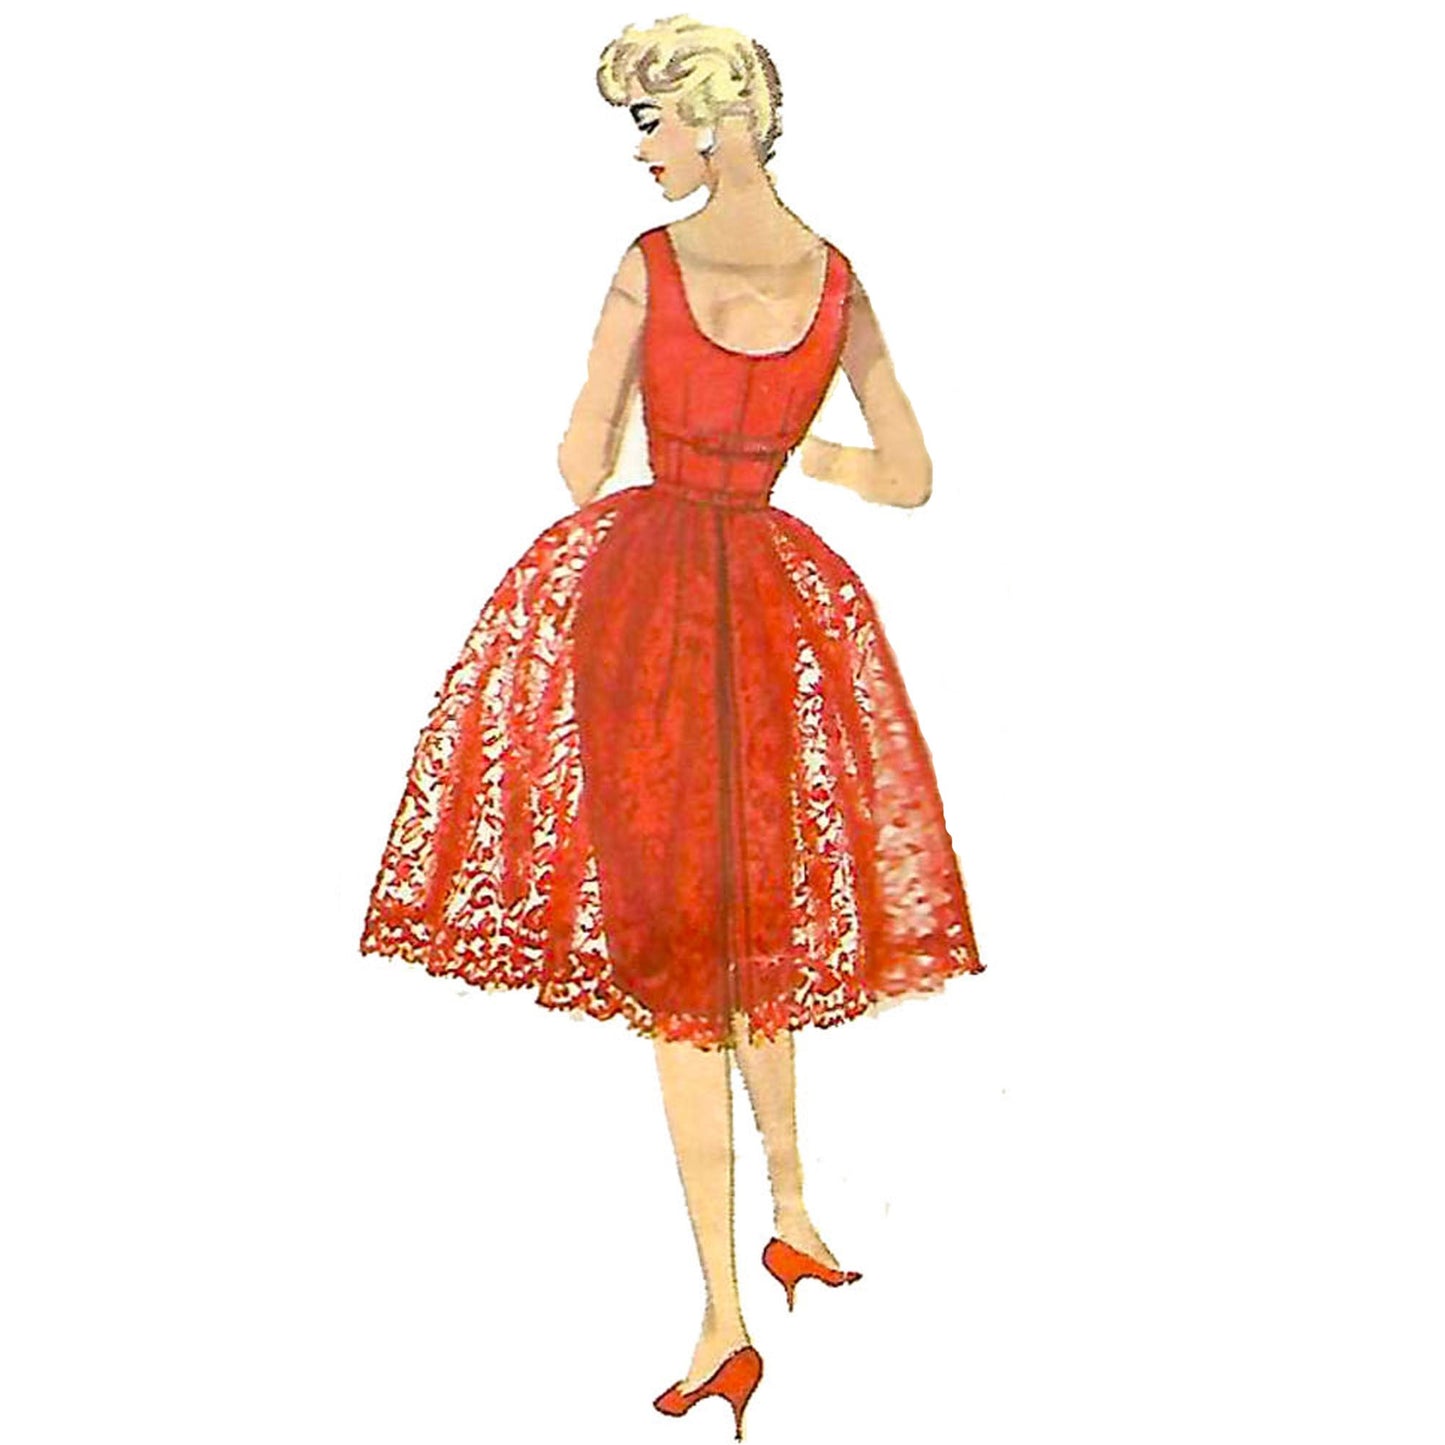 Model wearing 1950s dress, jacket and overskirt made from Simplicity 3035 pattern